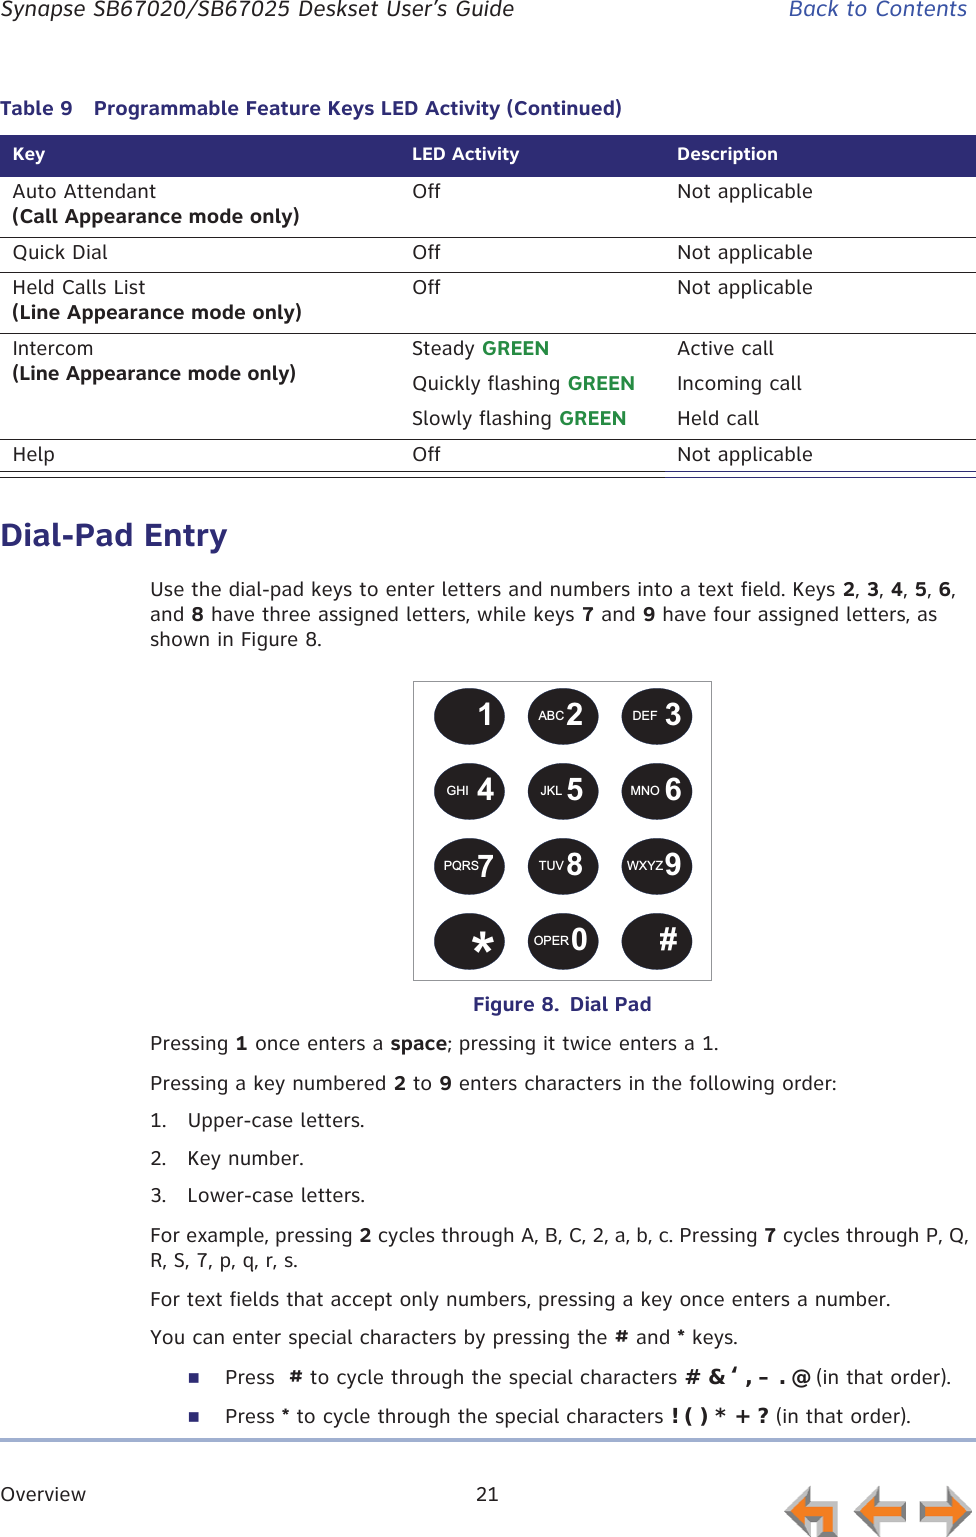 Overview 21      Synapse SB67020/SB67025 Deskset User’s Guide Back to ContentsDial-Pad EntryUse the dial-pad keys to enter letters and numbers into a text field. Keys 2, 3, 4, 5, 6, and 8 have three assigned letters, while keys 7 and 9 have four assigned letters, as shown in Figure 8.Figure 8.  Dial PadPressing 1 once enters a space; pressing it twice enters a 1.Pressing a key numbered 2 to 9 enters characters in the following order:1. Upper-case letters.2. Key number.3. Lower-case letters.For example, pressing 2 cycles through A, B, C, 2, a, b, c. Pressing 7 cycles through P, Q, R, S, 7, p, q, r, s.For text fields that accept only numbers, pressing a key once enters a number.You can enter special characters by pressing the # and * keys.Press  # to cycle through the special characters # &amp; ‘ , – . @ (in that order).Press * to cycle through the special characters ! ( ) * + ? (in that order).Auto Attendant (Call Appearance mode only)Off Not applicableQuick Dial Off Not applicableHeld Calls List (Line Appearance mode only)Off Not applicableIntercom (Line Appearance mode only)Steady GREEN Active callQuickly flashing GREEN Incoming callSlowly flashing GREEN Held callHelp Off Not applicableTable 9  Programmable Feature Keys LED Activity (Continued)Key LED Activity Description12 345 67890ABC DEFGHI JKL MNOPQRS TUV WXYZOPER#*